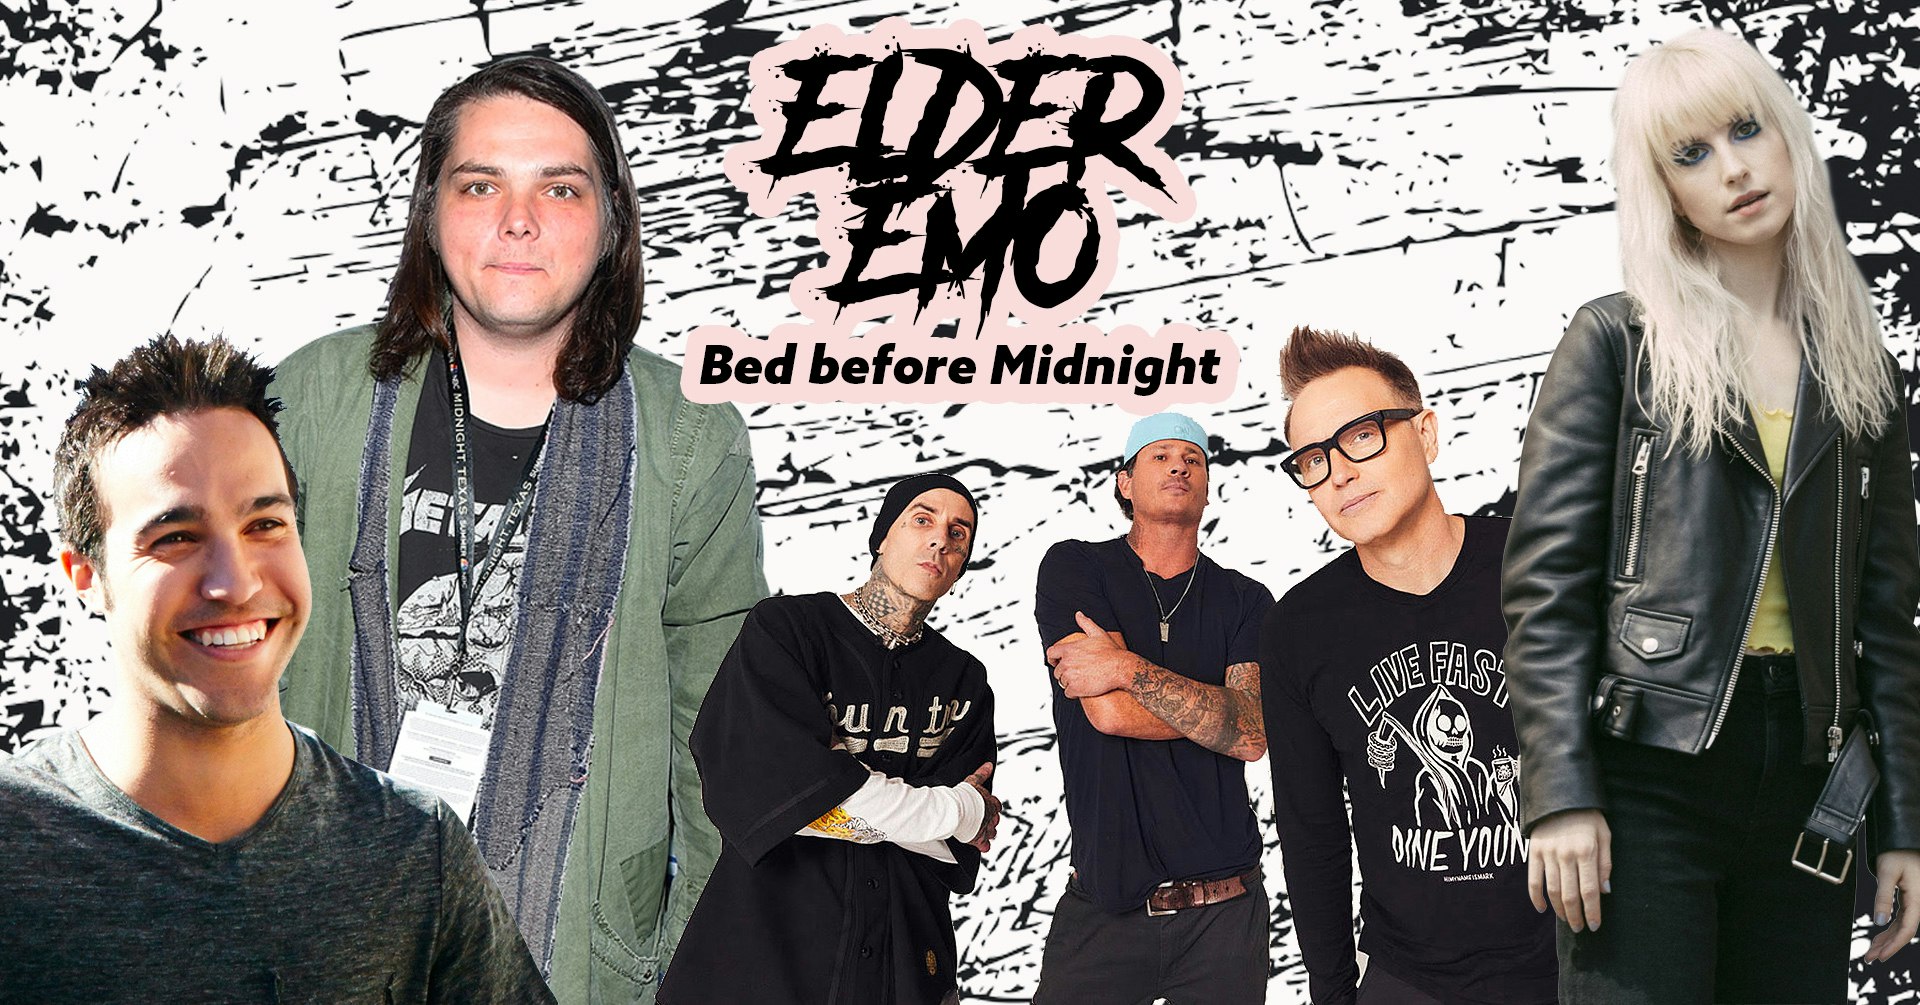 ELDER EMO – An Emo Party but you’re in bed before midnight